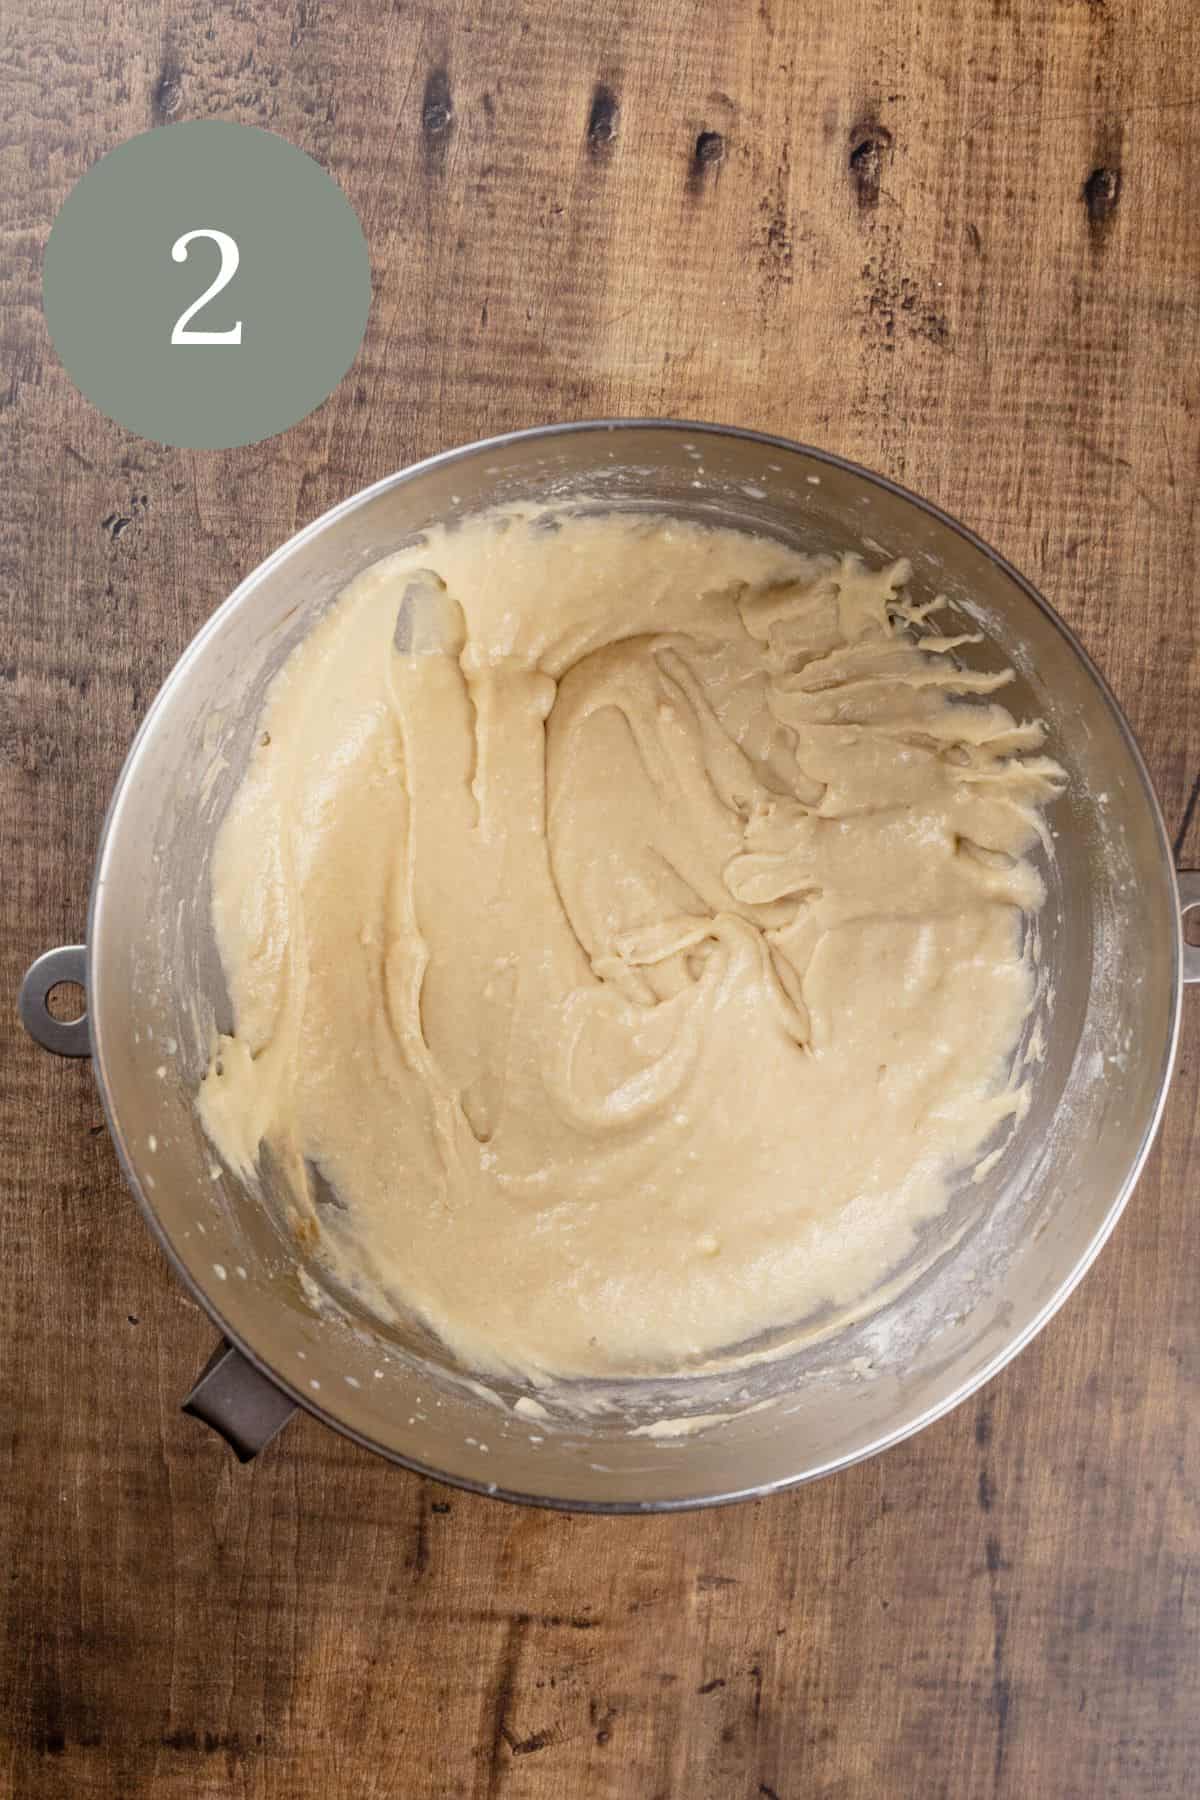 fully mixed cupcake batter in the silver mixing bowl on the wood tabletop